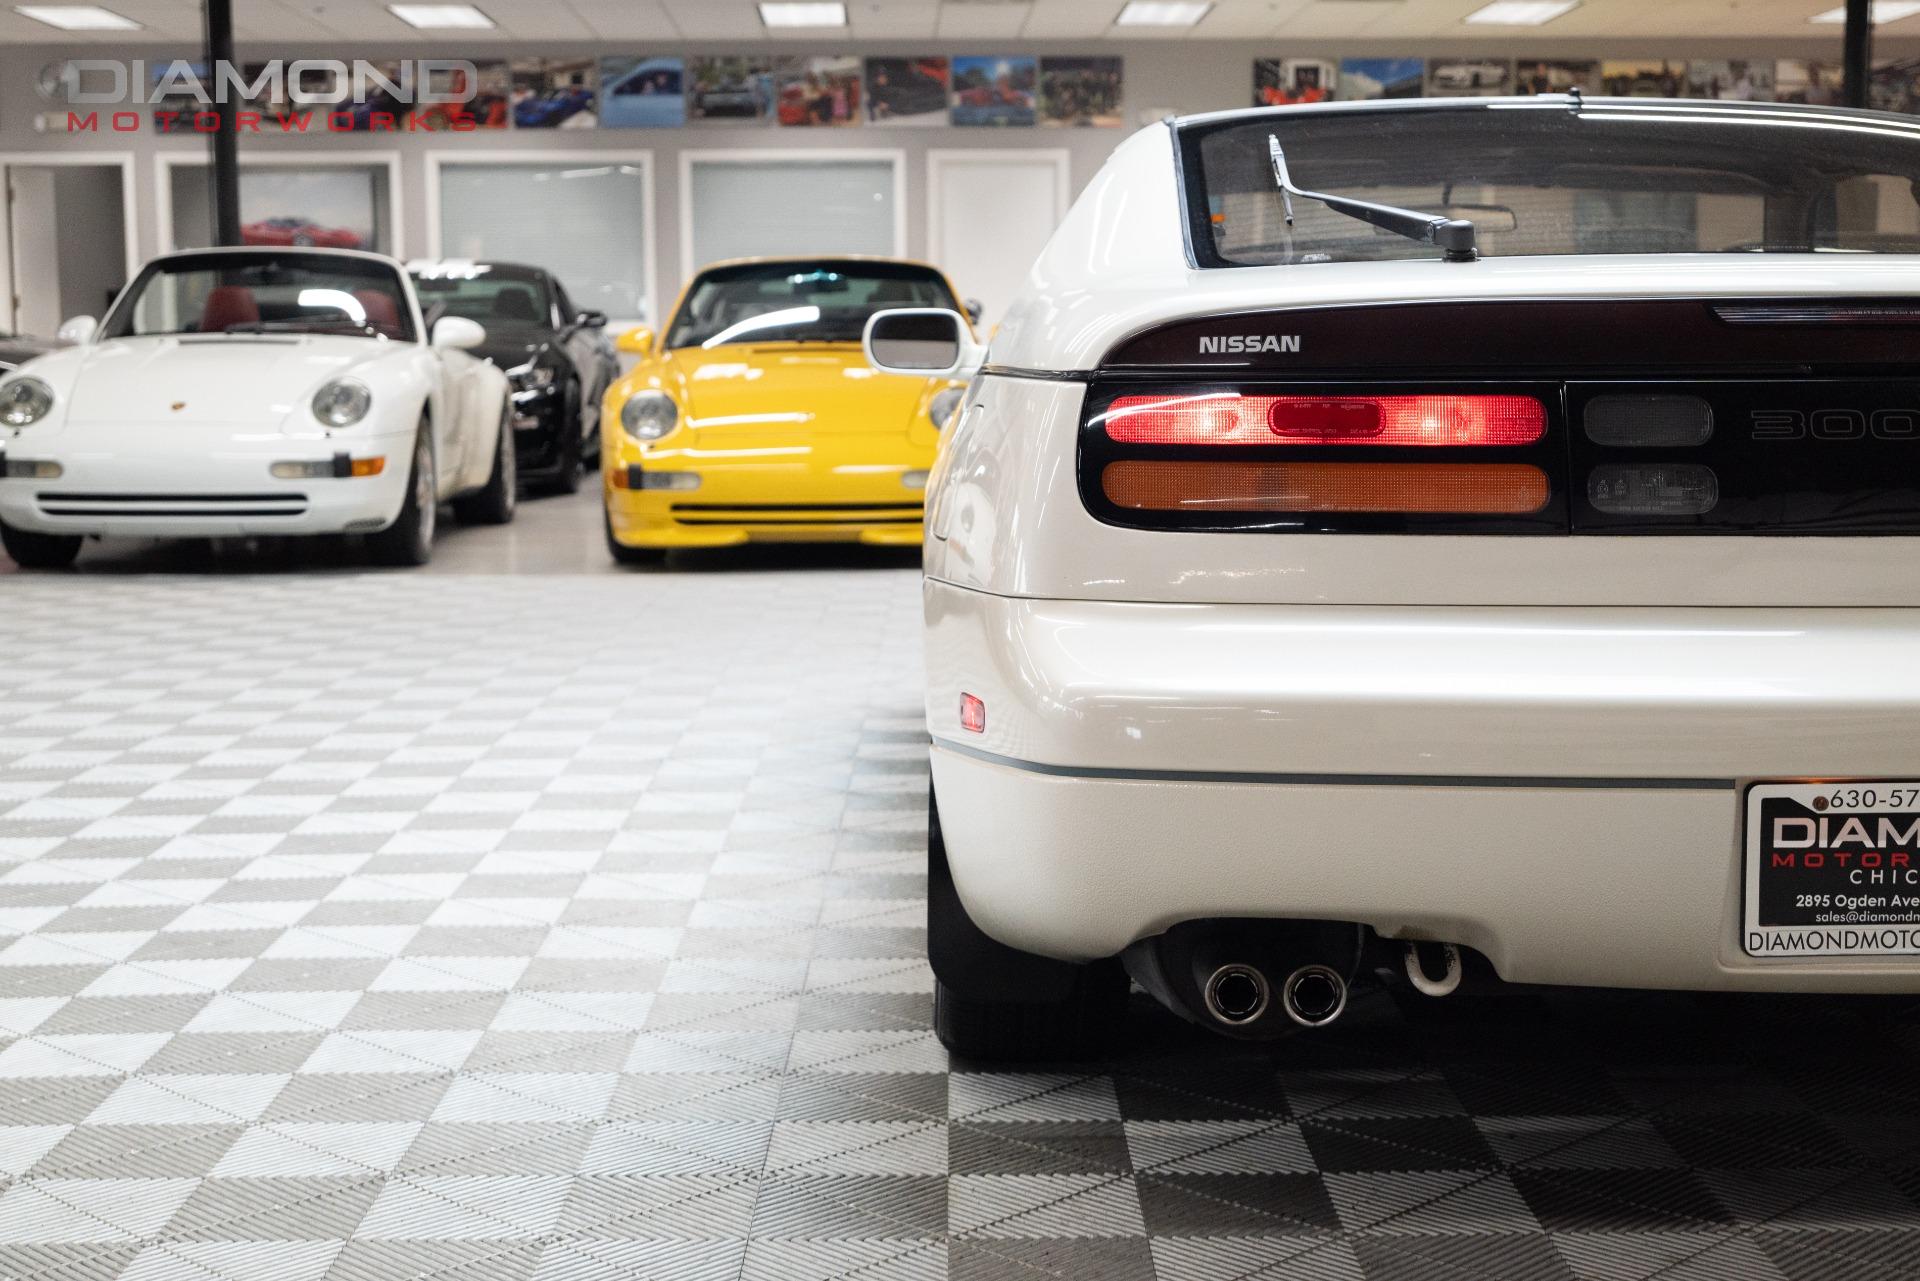 Used 1992 Nissan 300ZX 2+2 For Sale (Sold) | Diamond Motorworks 